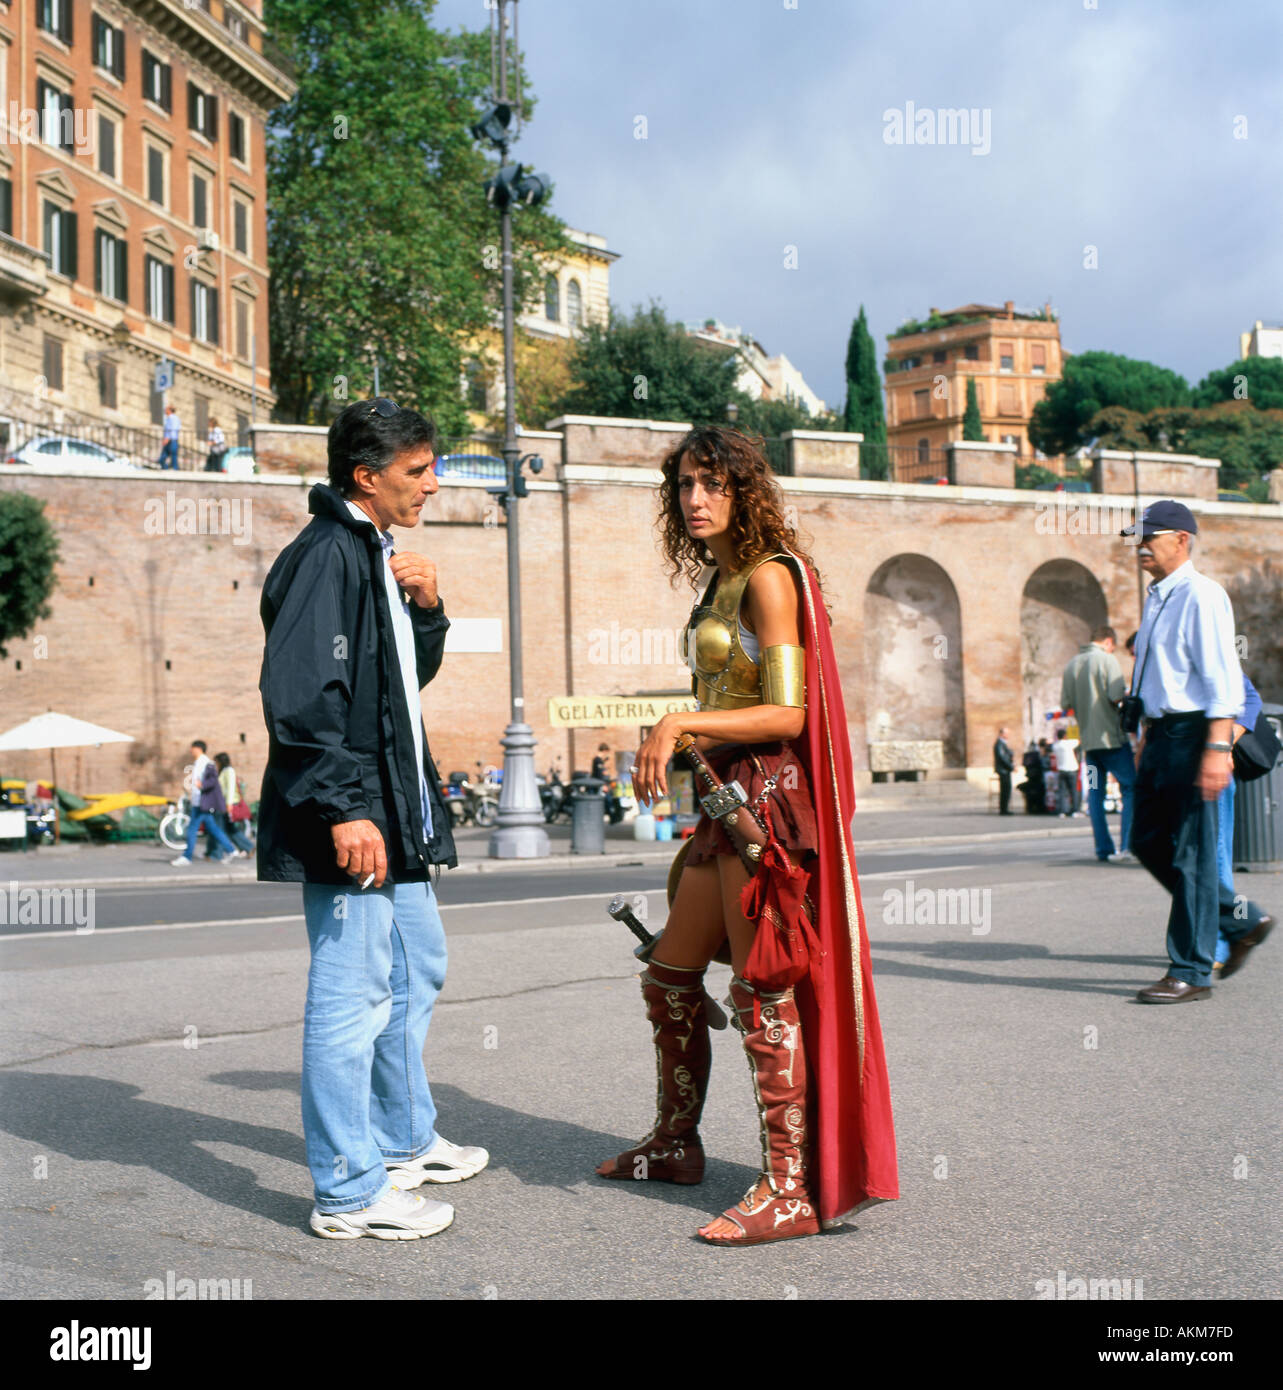 Attractive Italian woman Roman Centurion guide in fancy dress talking to a  tourist outside the Colosseum Rome Italy Europe EU KATHY DEWITT Stock Photo  - Alamy